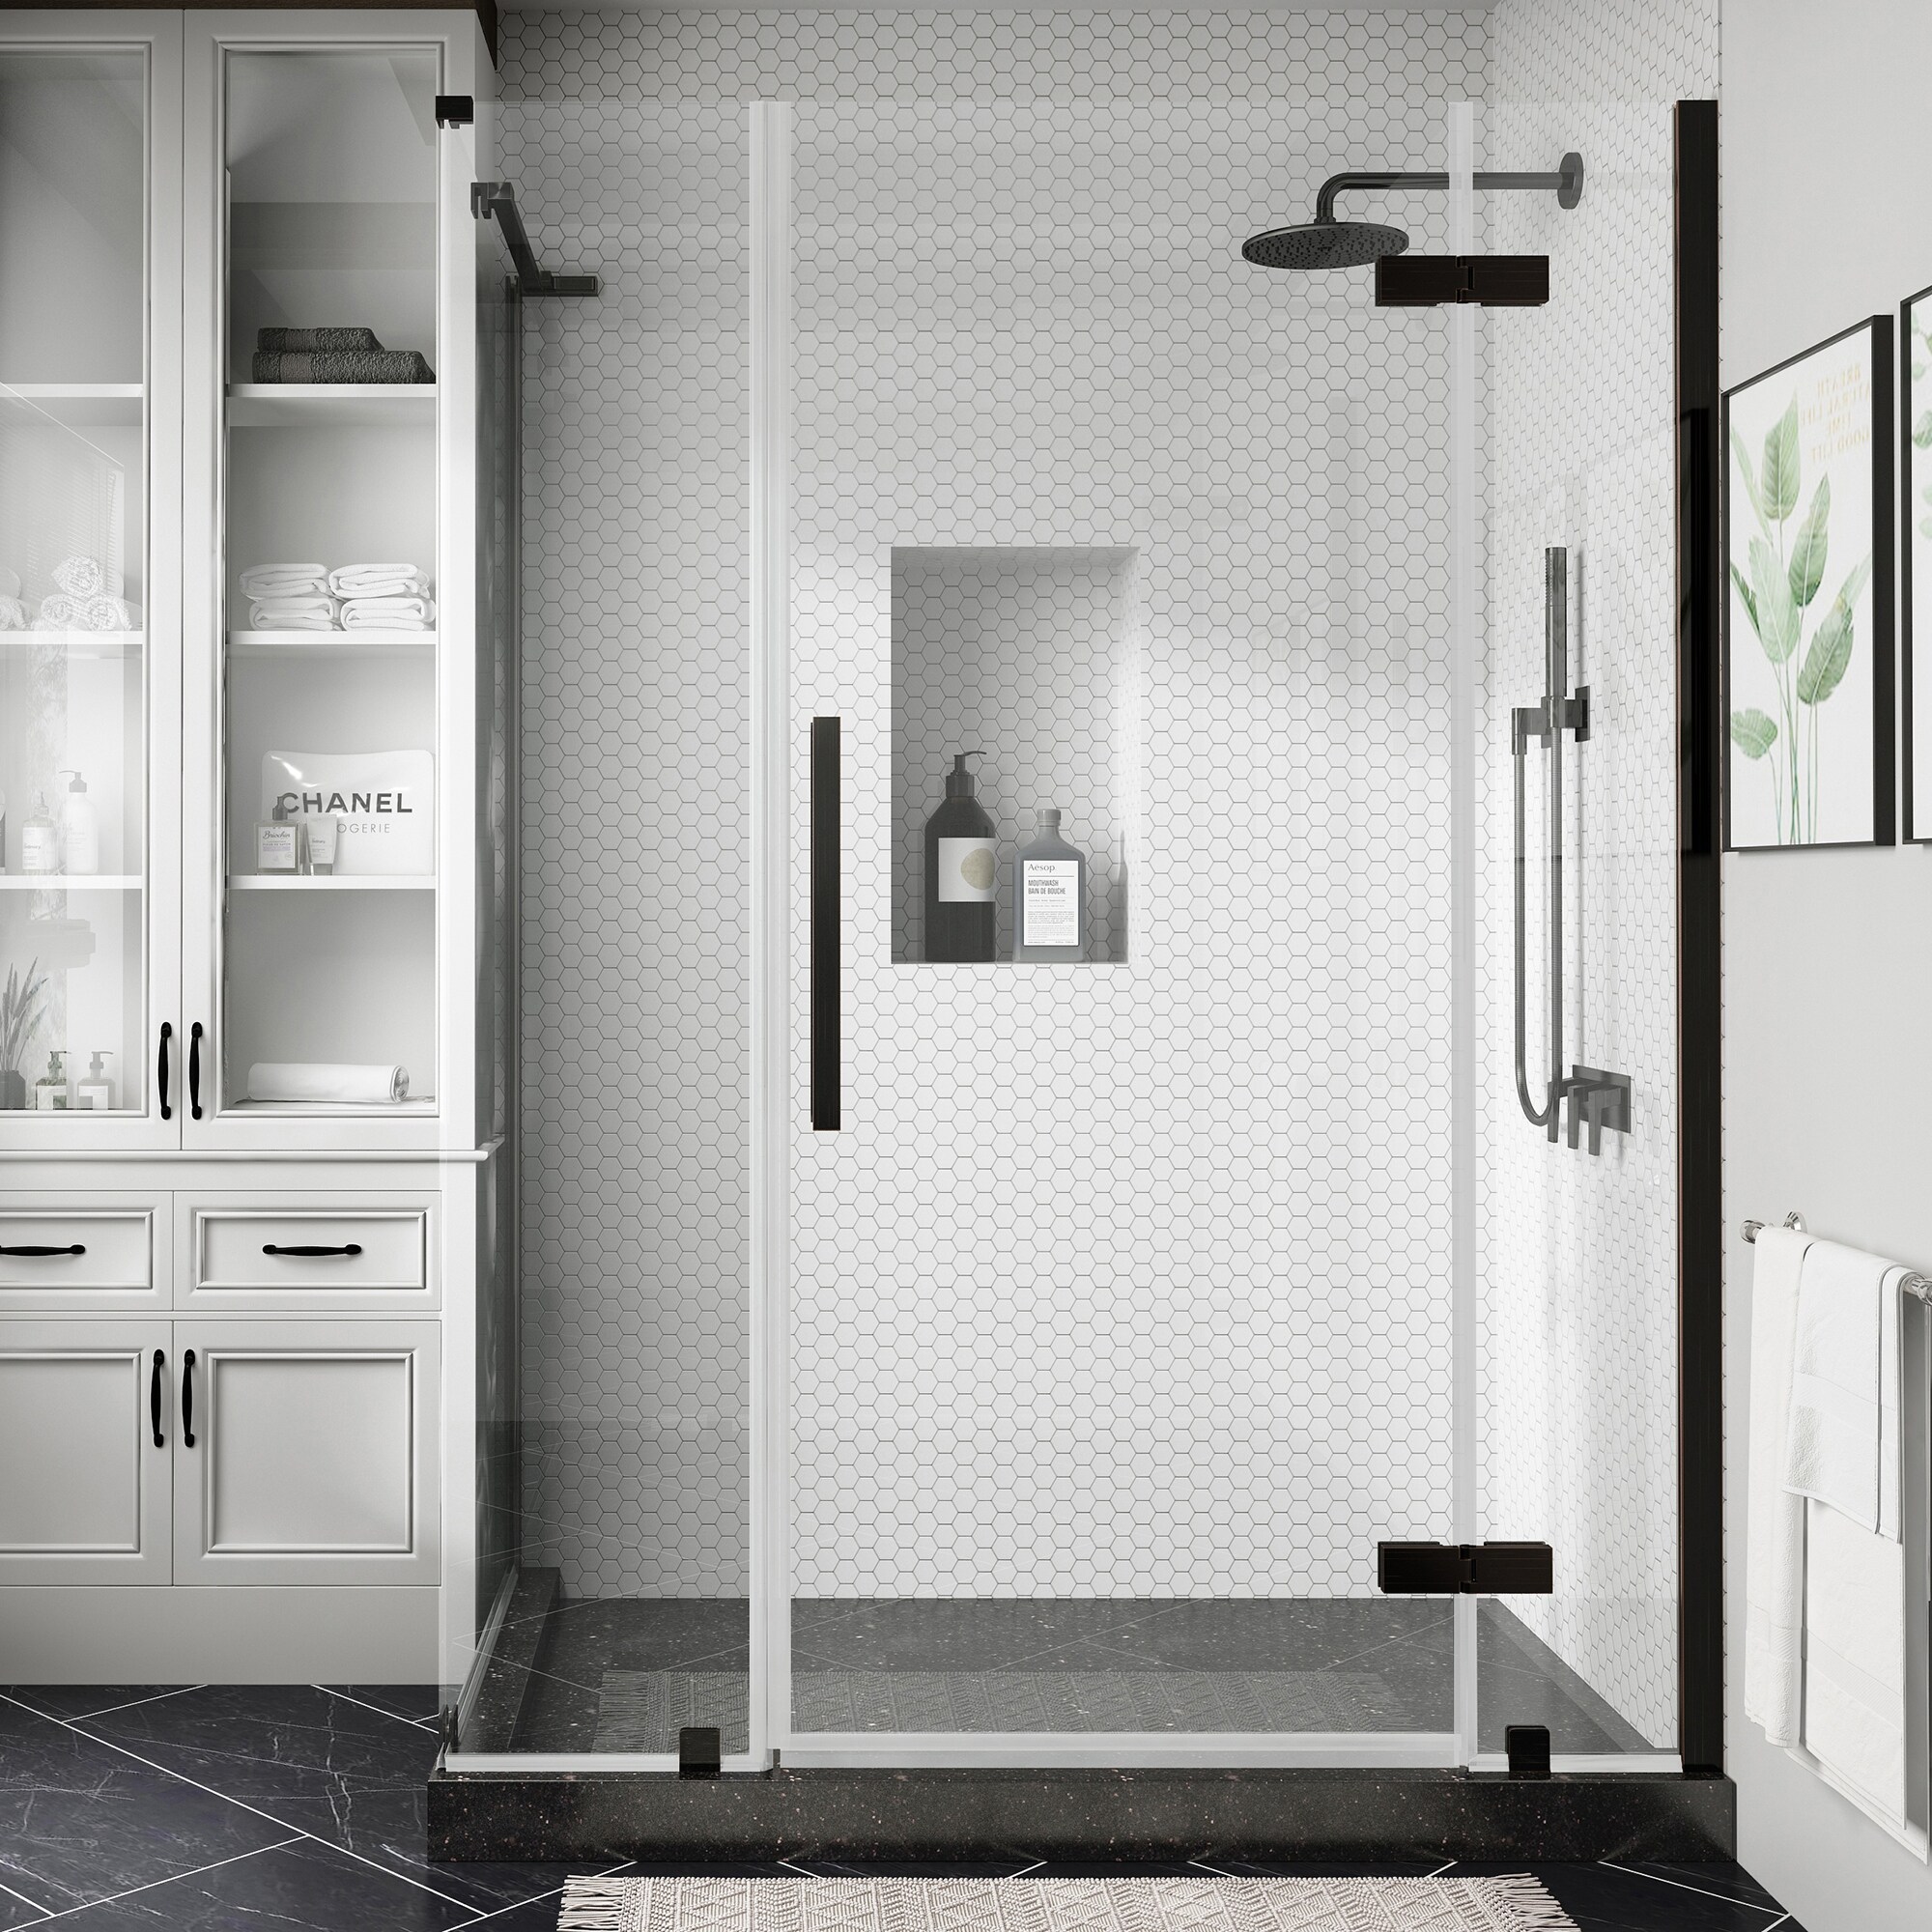 Ove Decors Tampa 54 in. L x 32 in. W x 72 in. H Corner Shower Kit with Pivot Frameless Shower Door in Chrome and Shower Pan